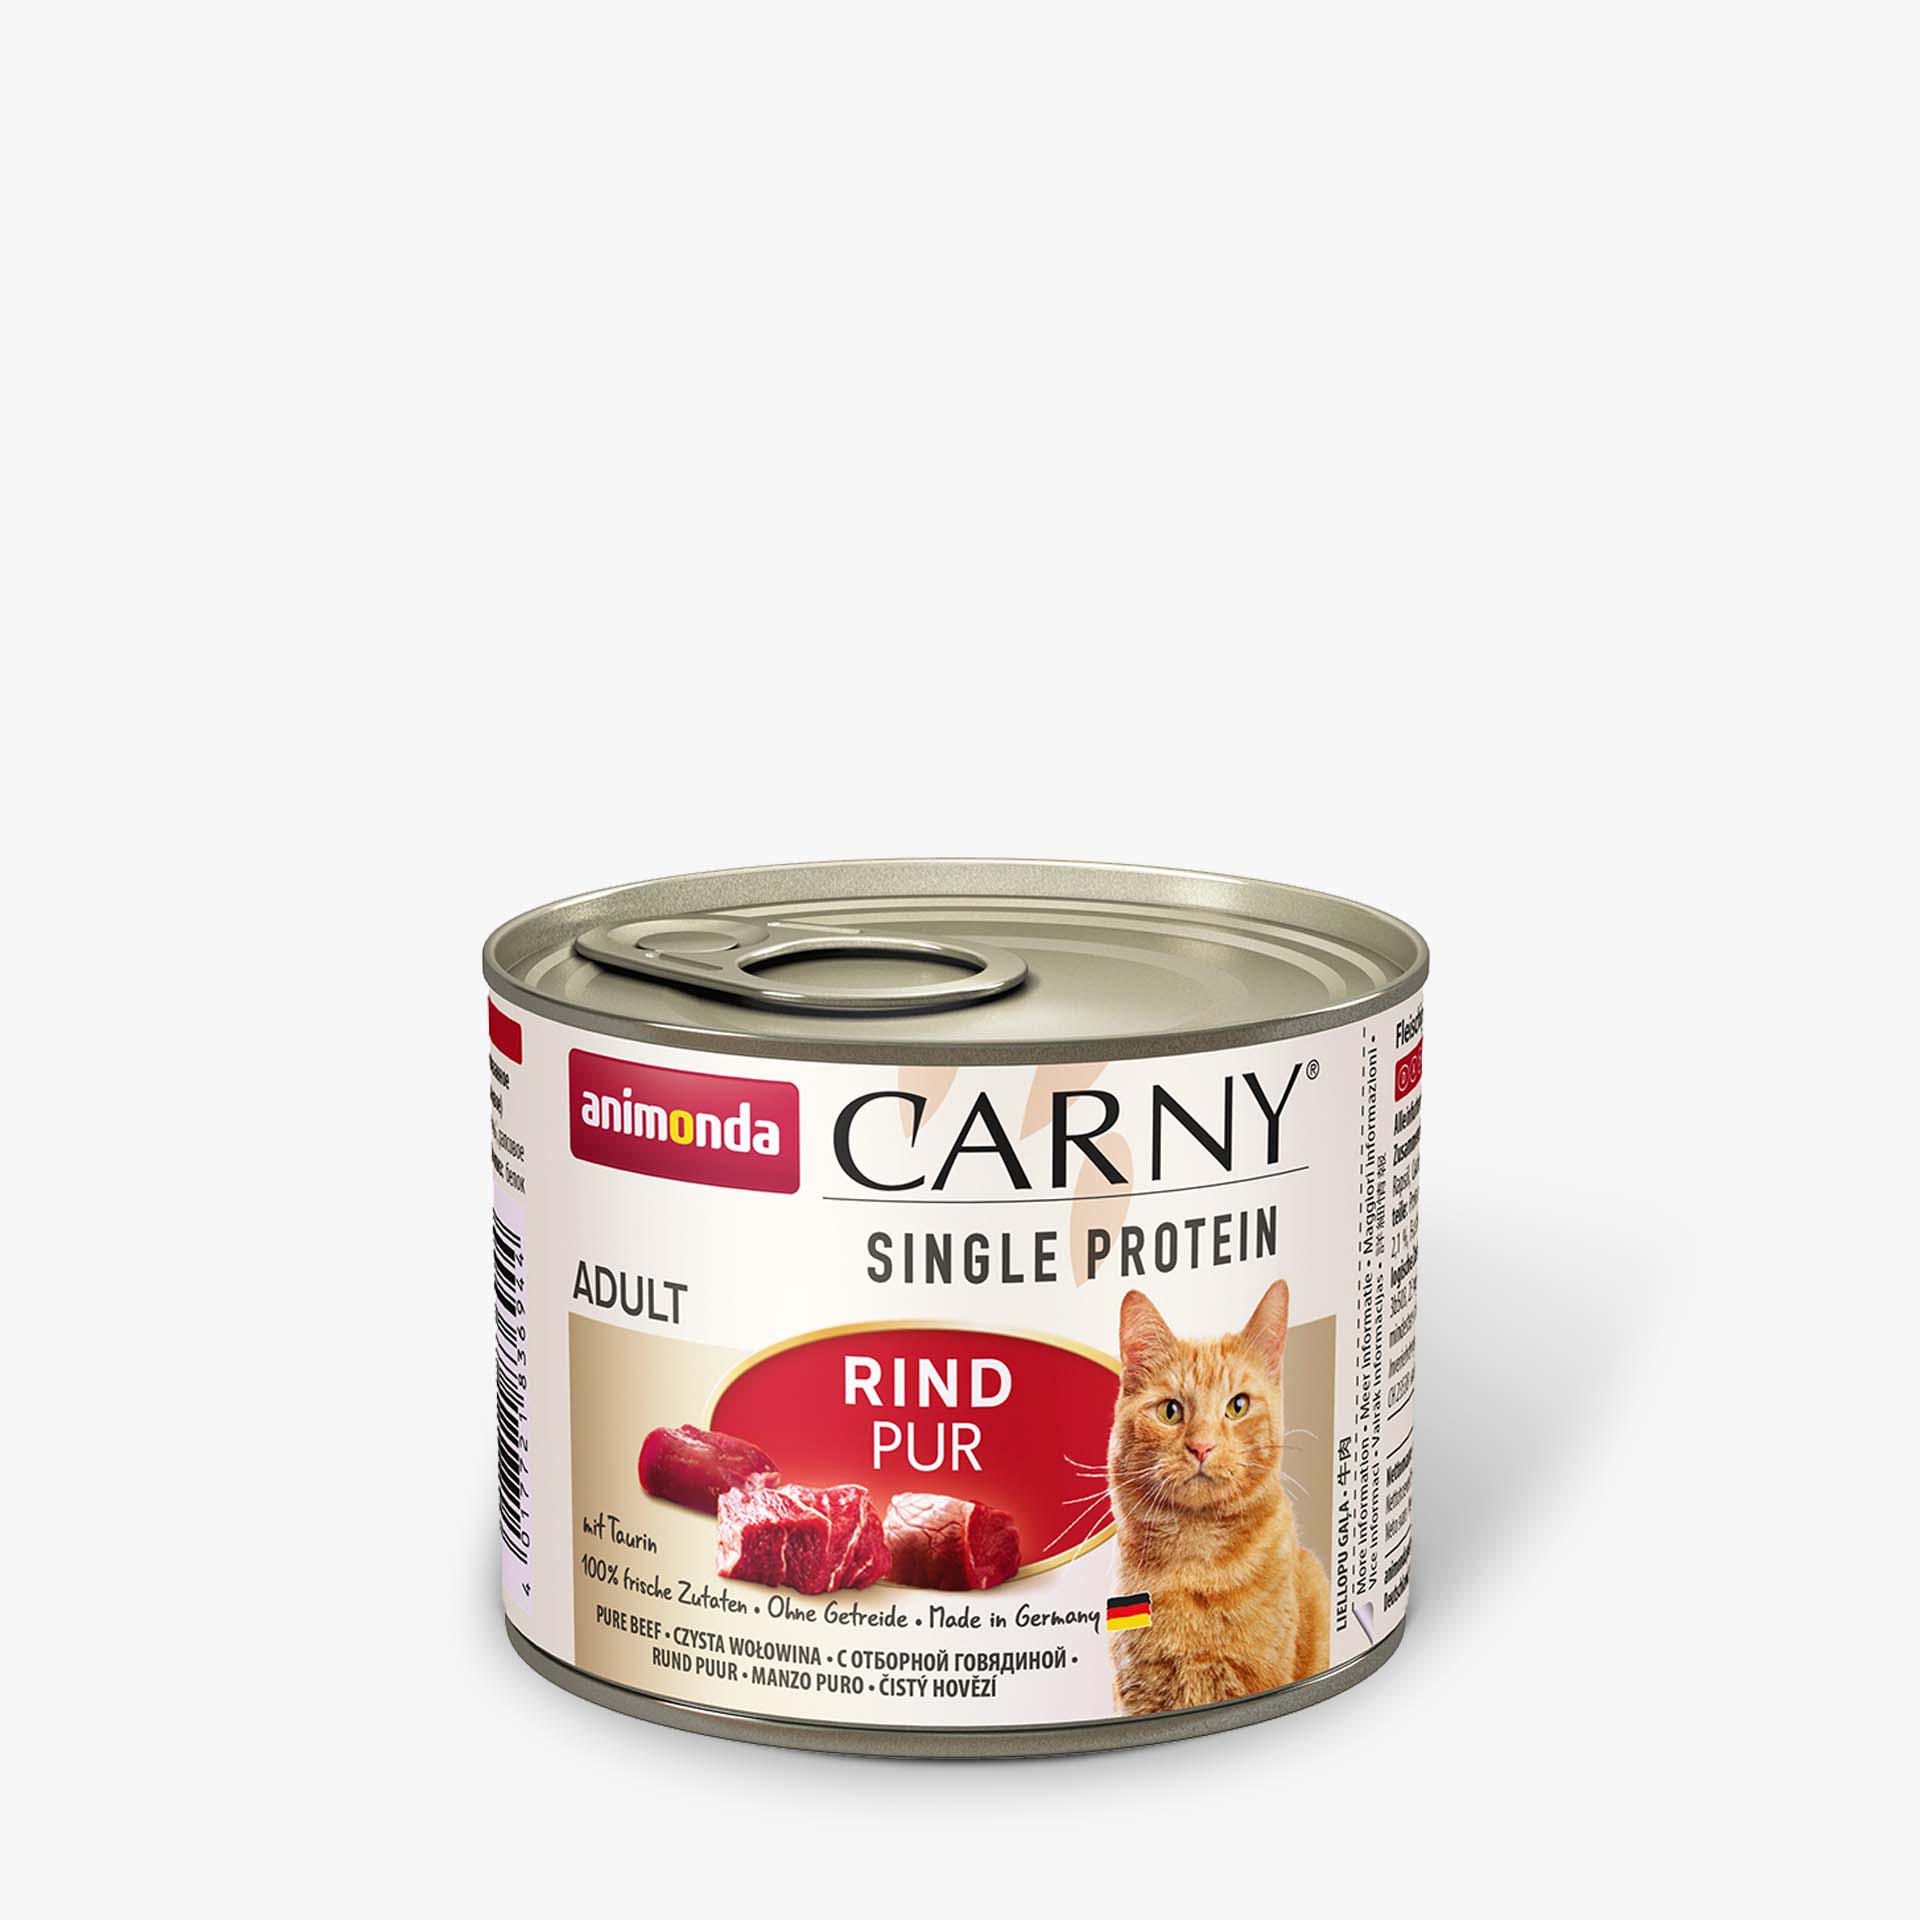 Carny pure beef Single Protein